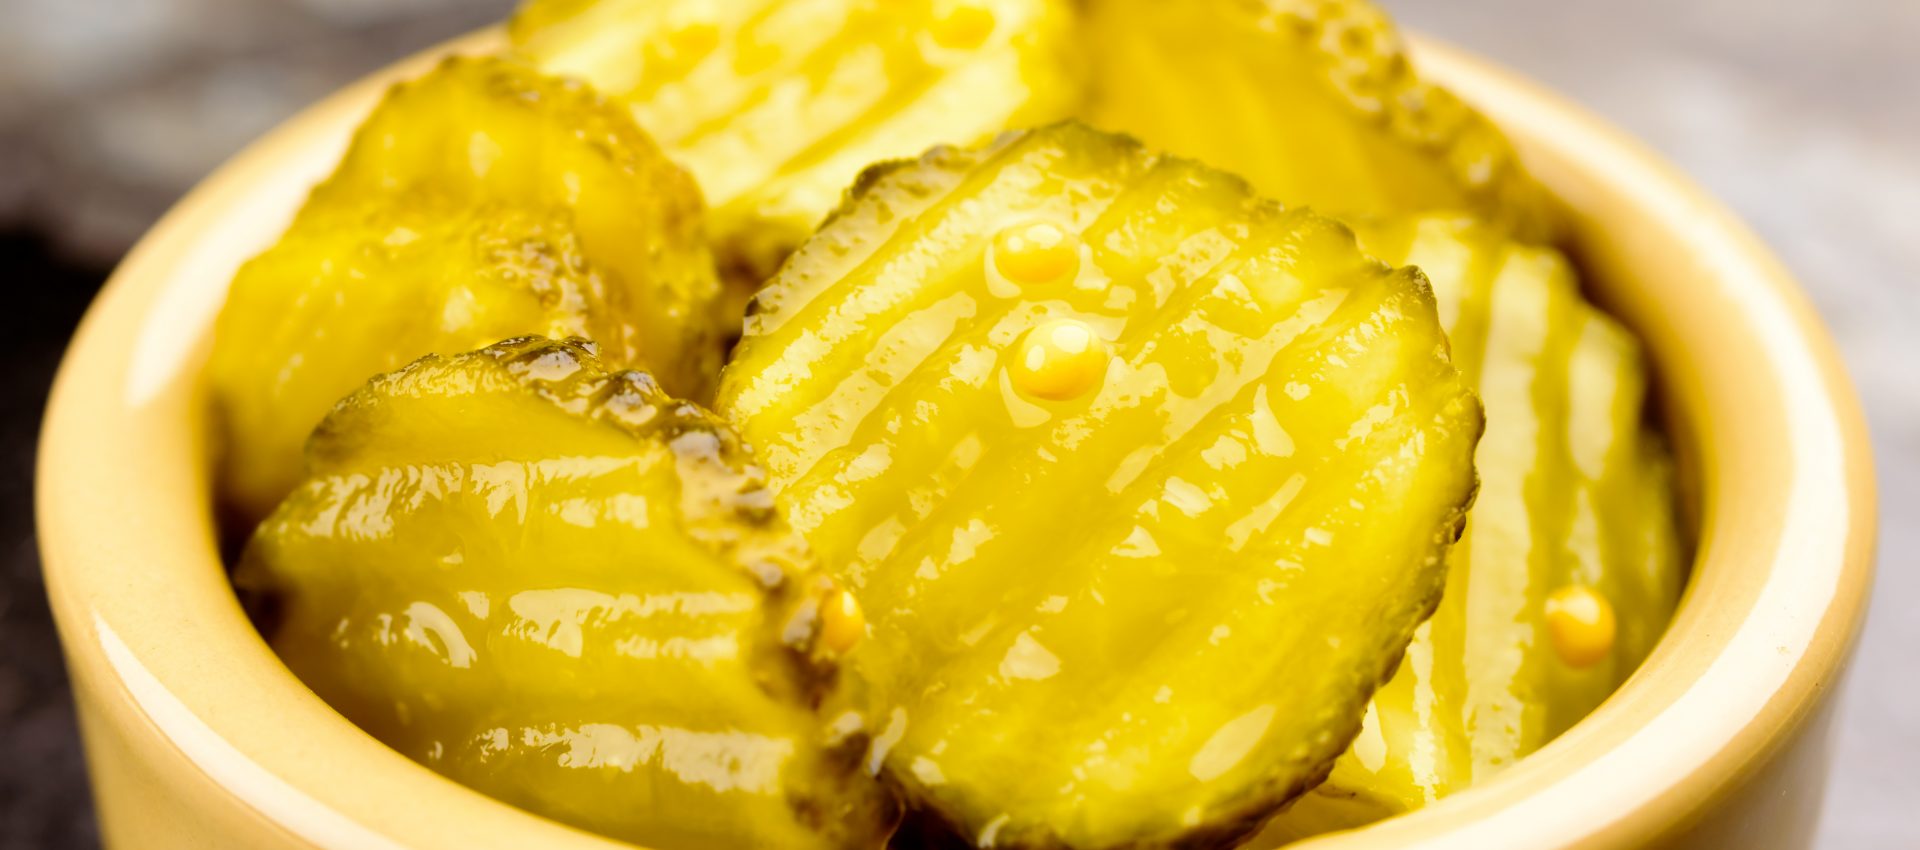 Mrs. Wages® State Fair Zesty Bread and Butter Pickles